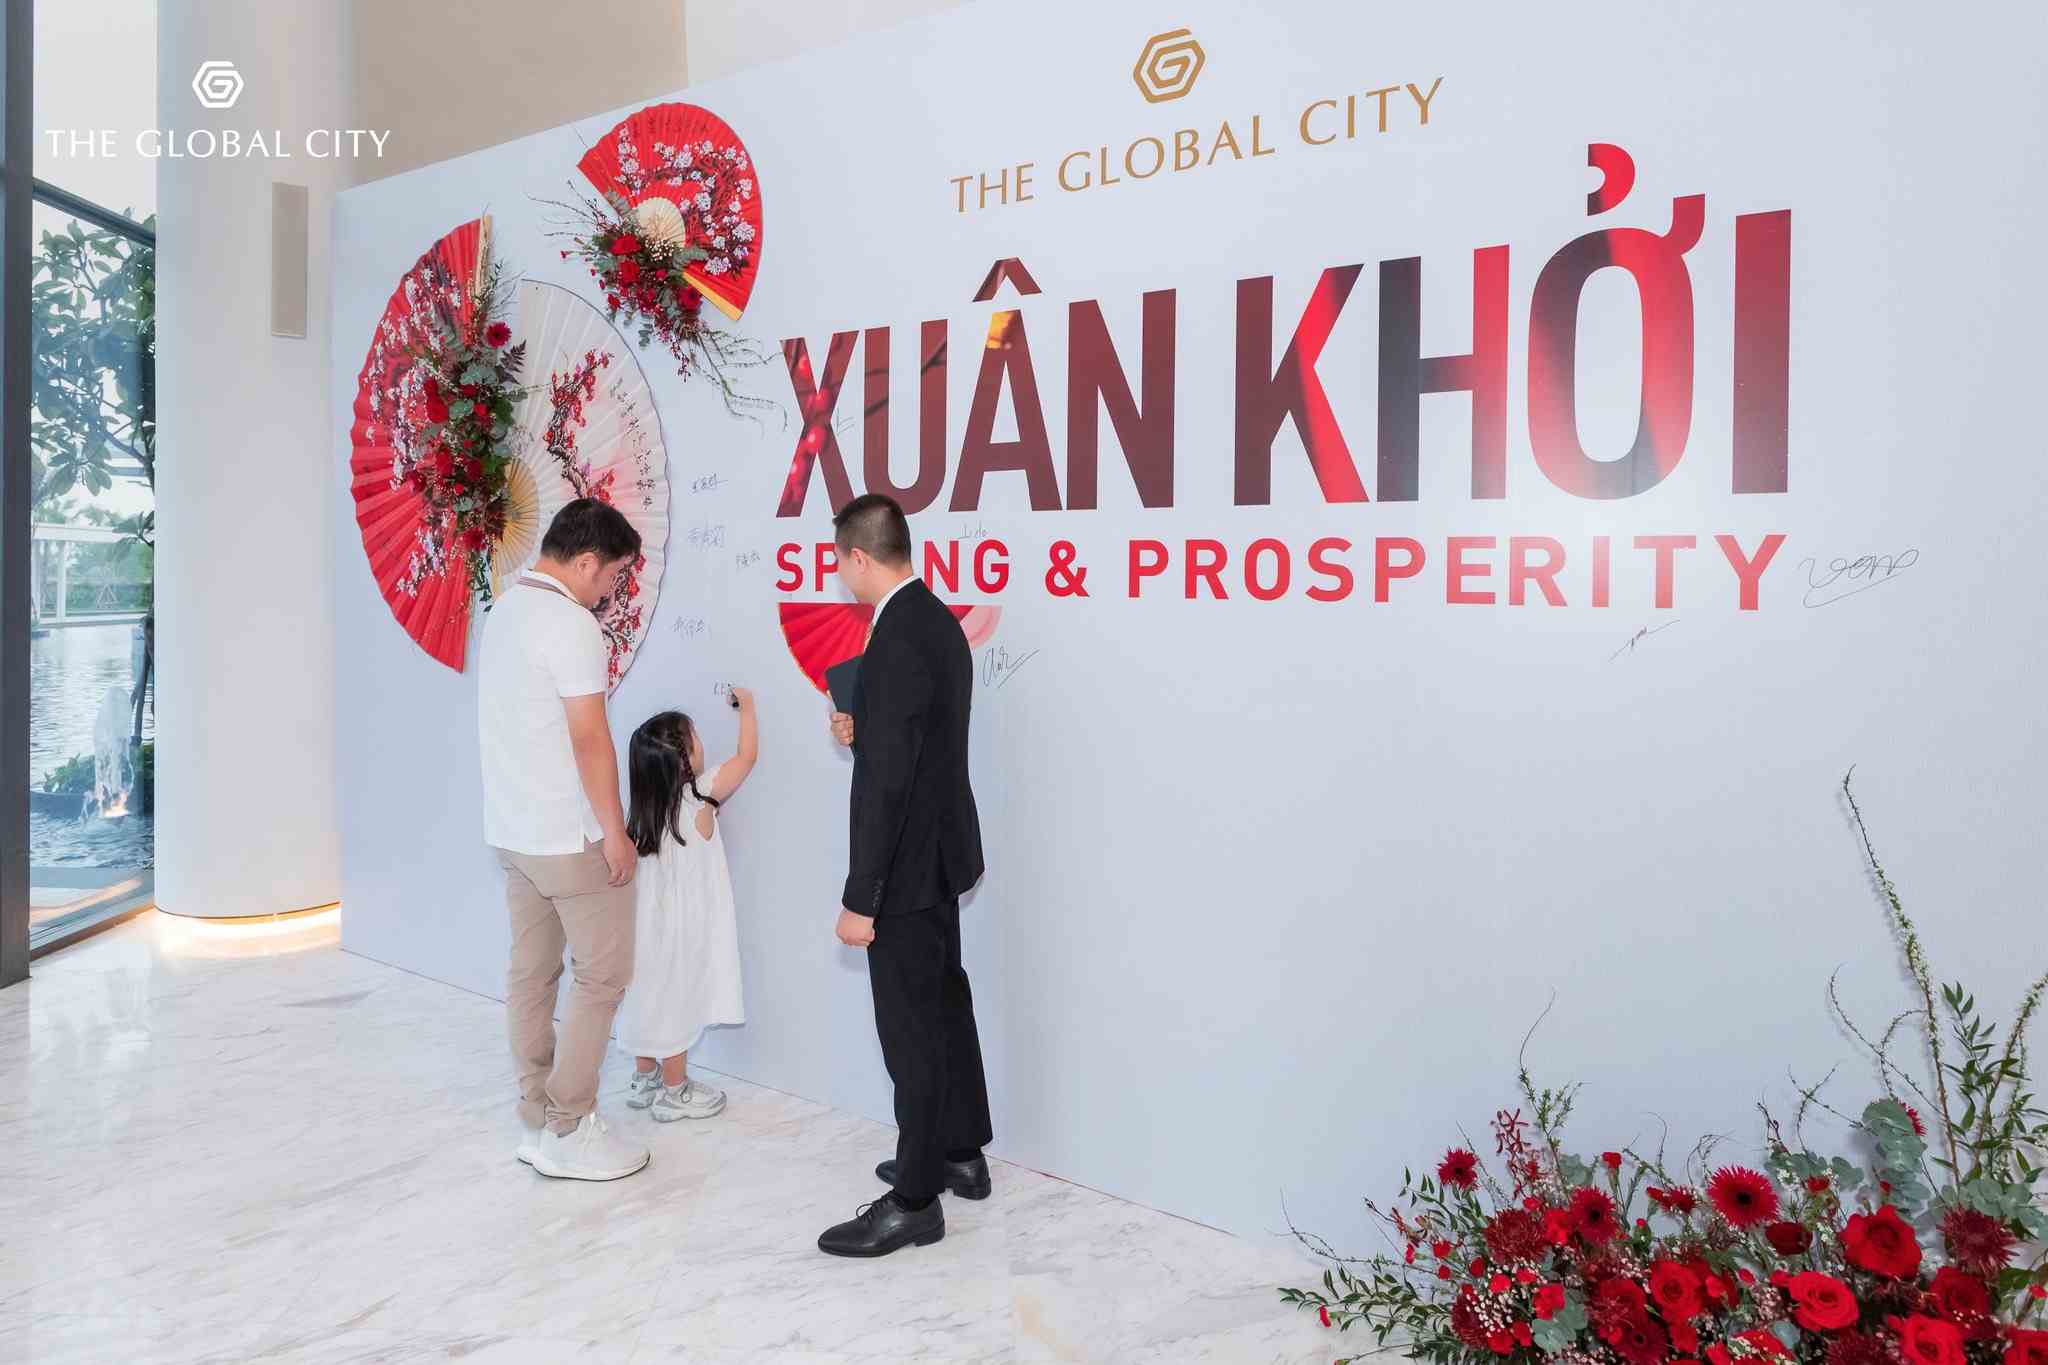 LOTS of Chinese businessmen find business potential in the new center